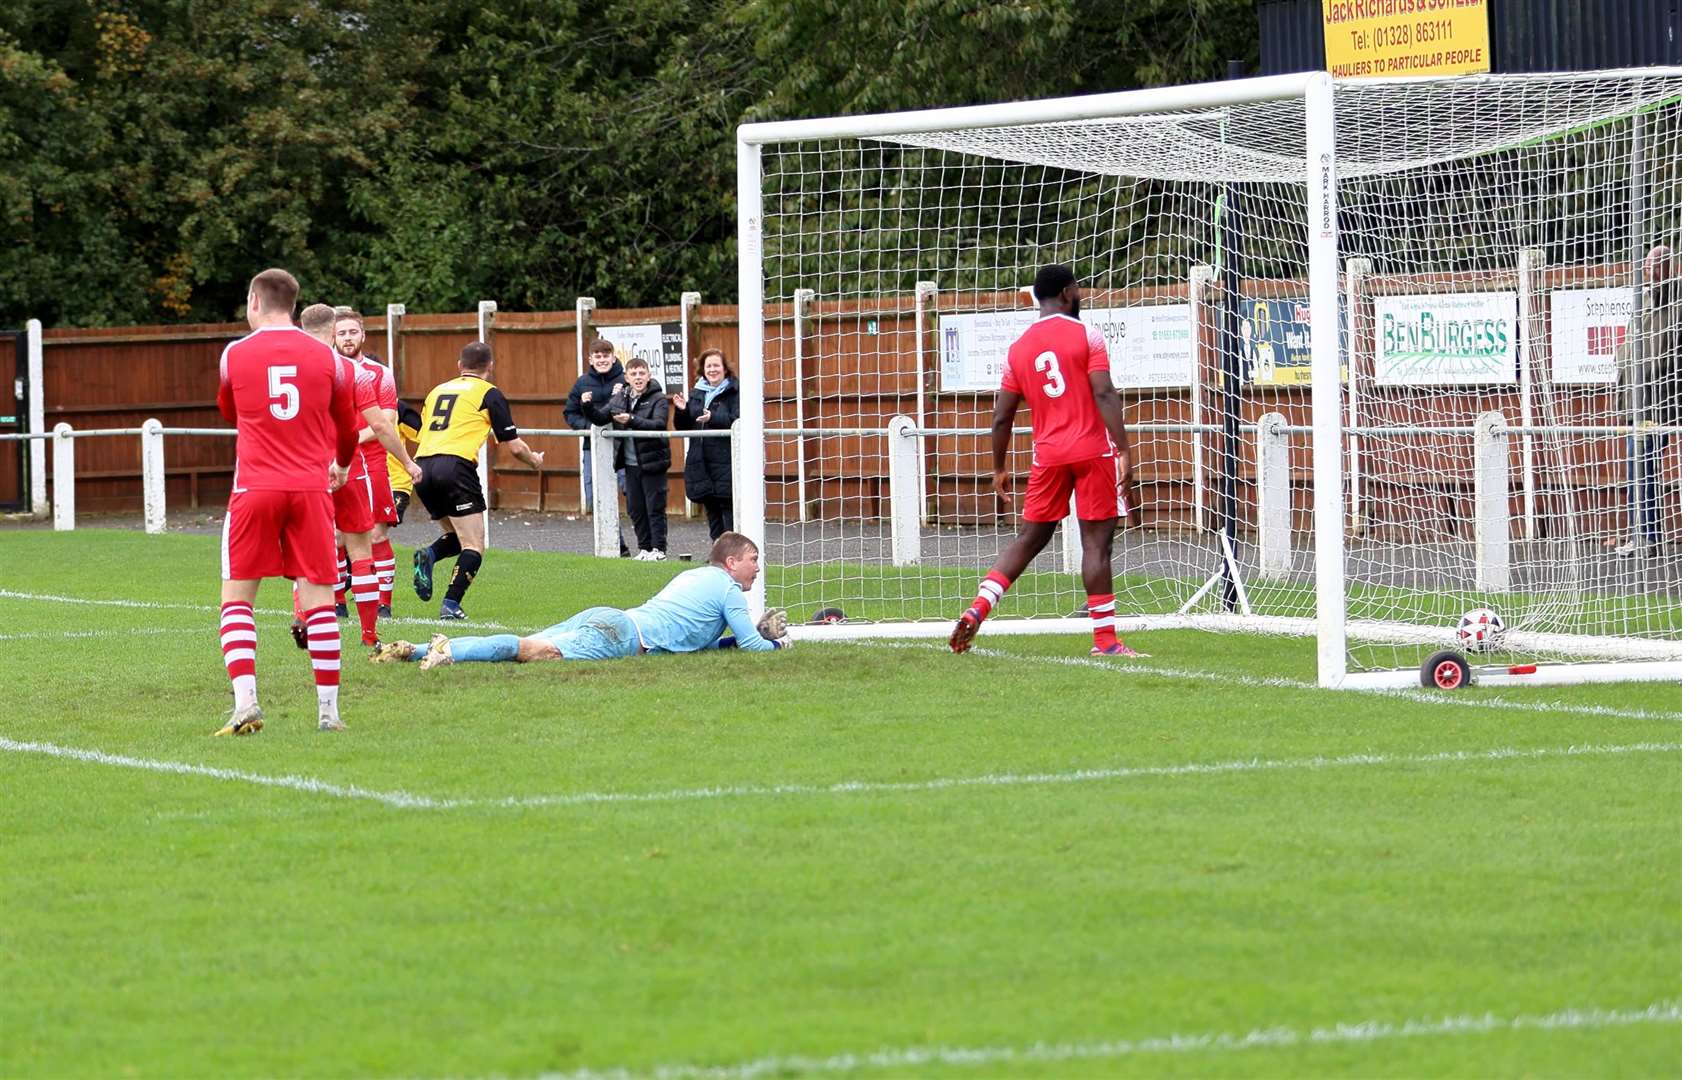 Jake Watts gives Fakenham the lead against Cockfosters on Saturday